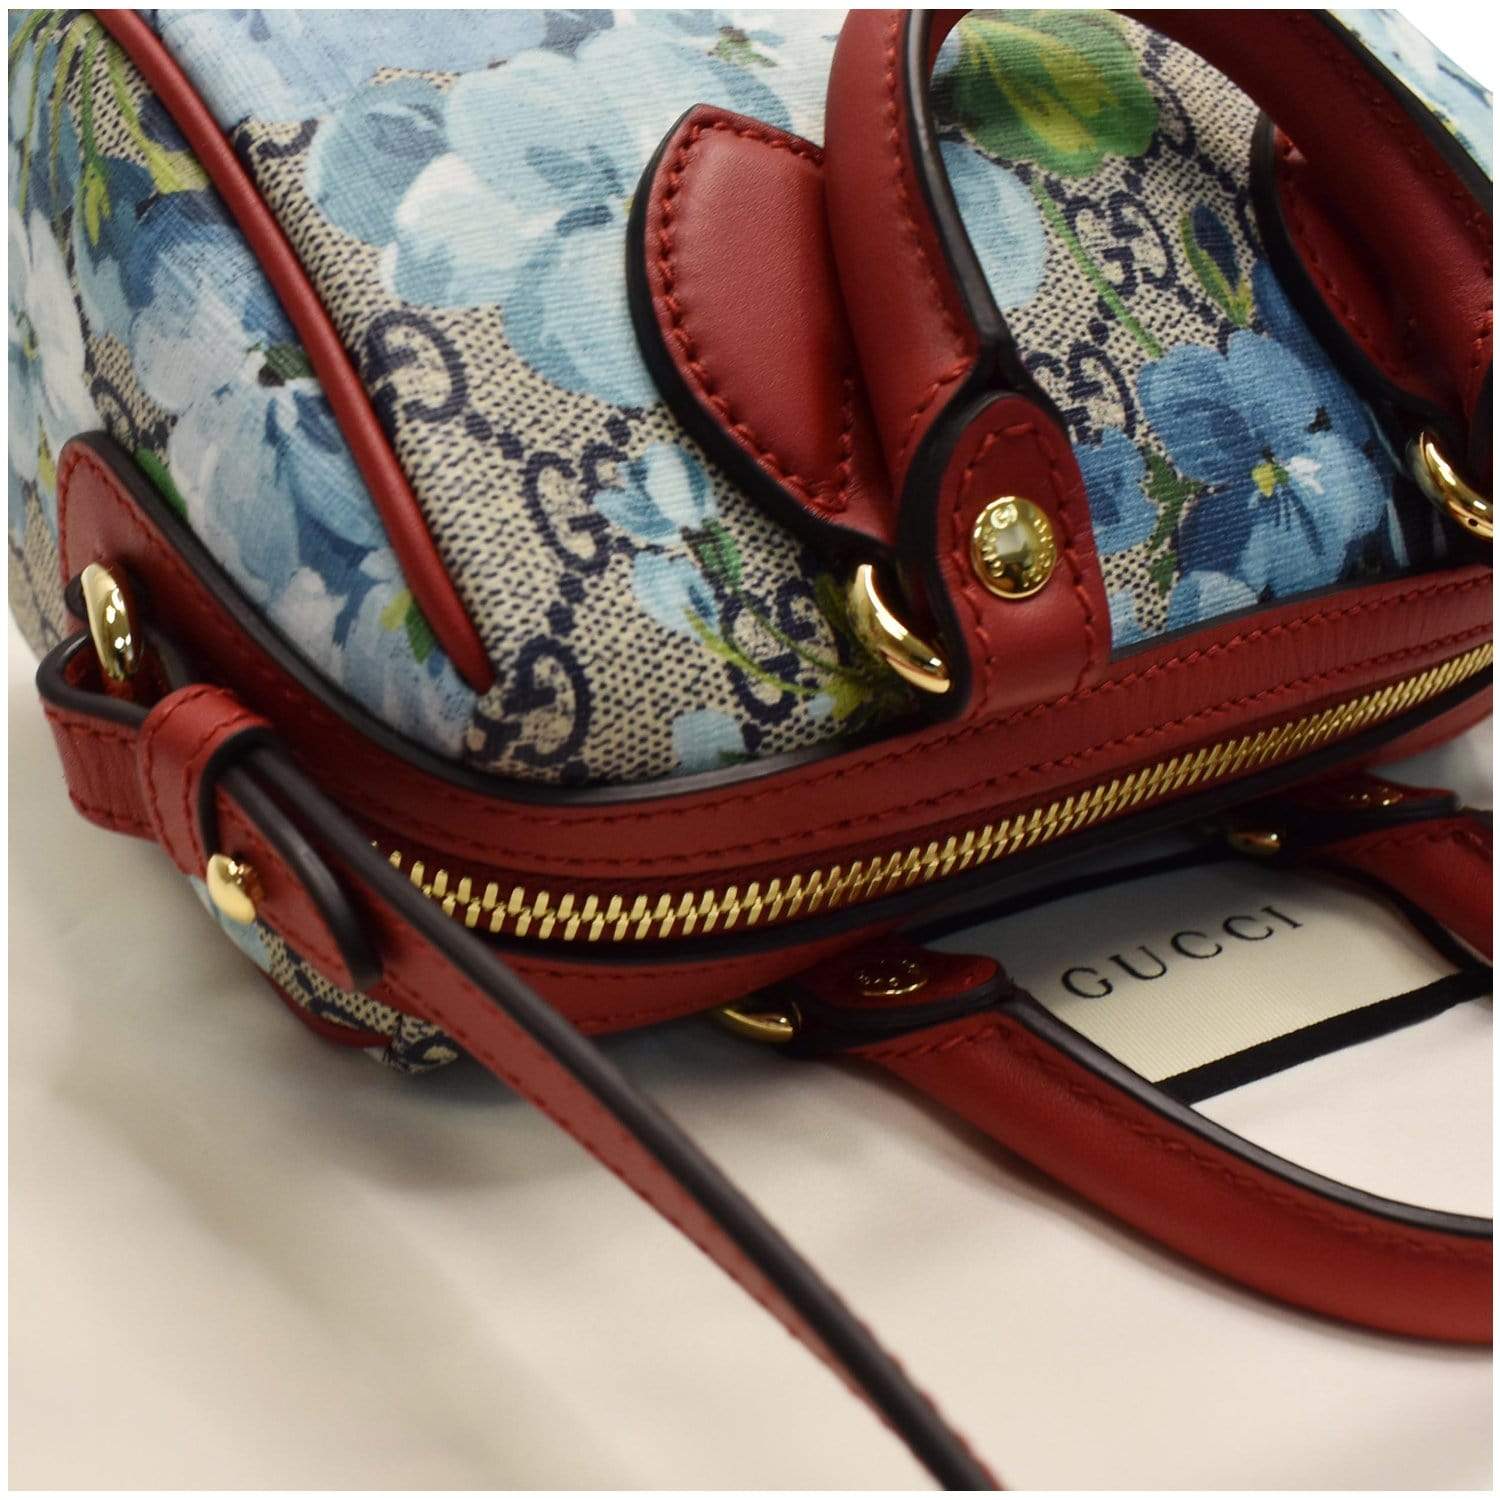 GUCCI Blooms GG Floral Supreme Canvas Leather Satchel Bag Red 546316 